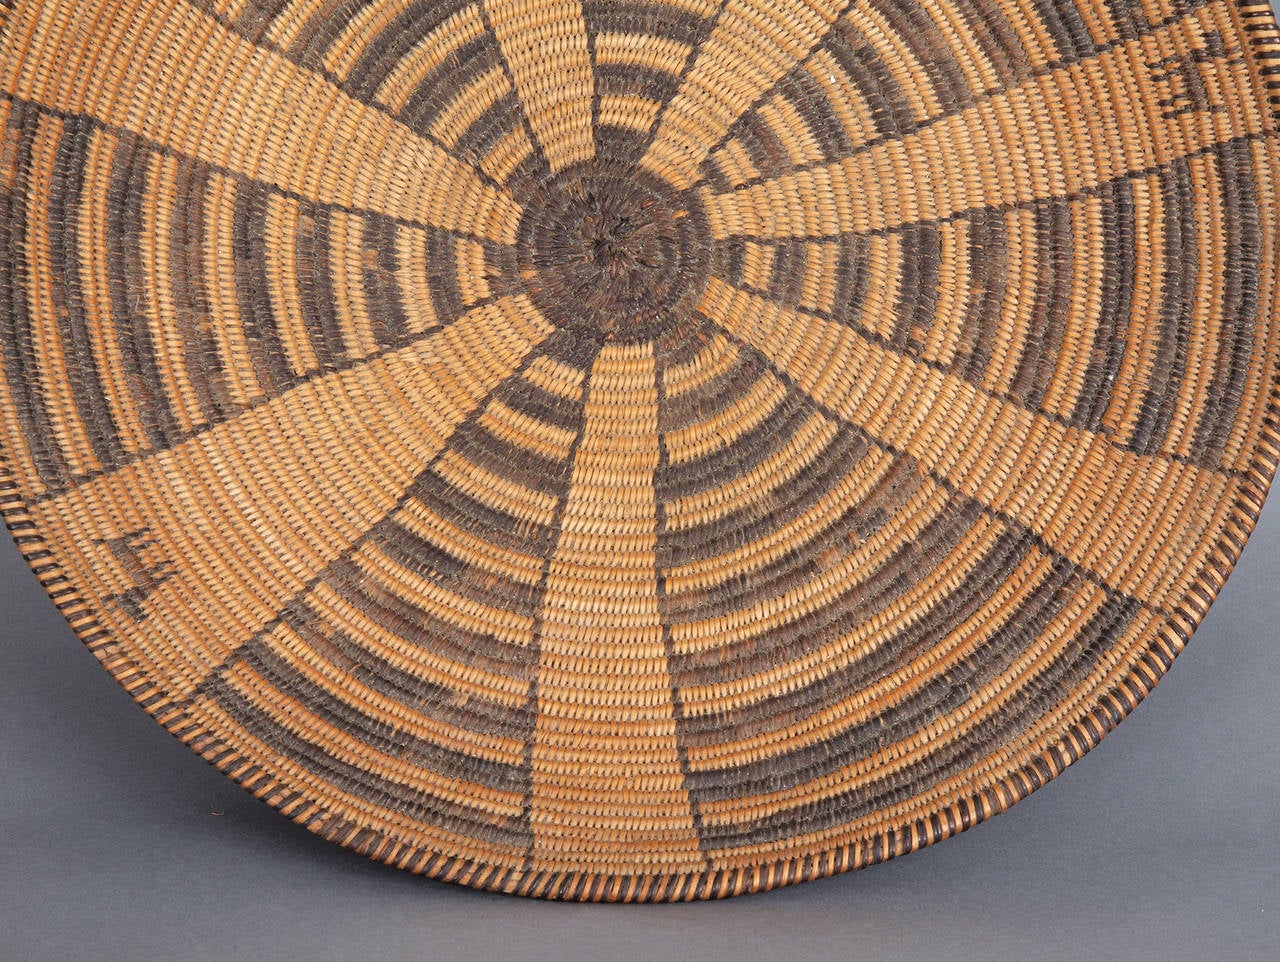 This Southwestern American Indian shallow bowl or tray form is finely woven of willow and devil's claw. A geometric design is enhanced with three dog forms.

Expedited and International shipping is available; please contact us for a quote.

As